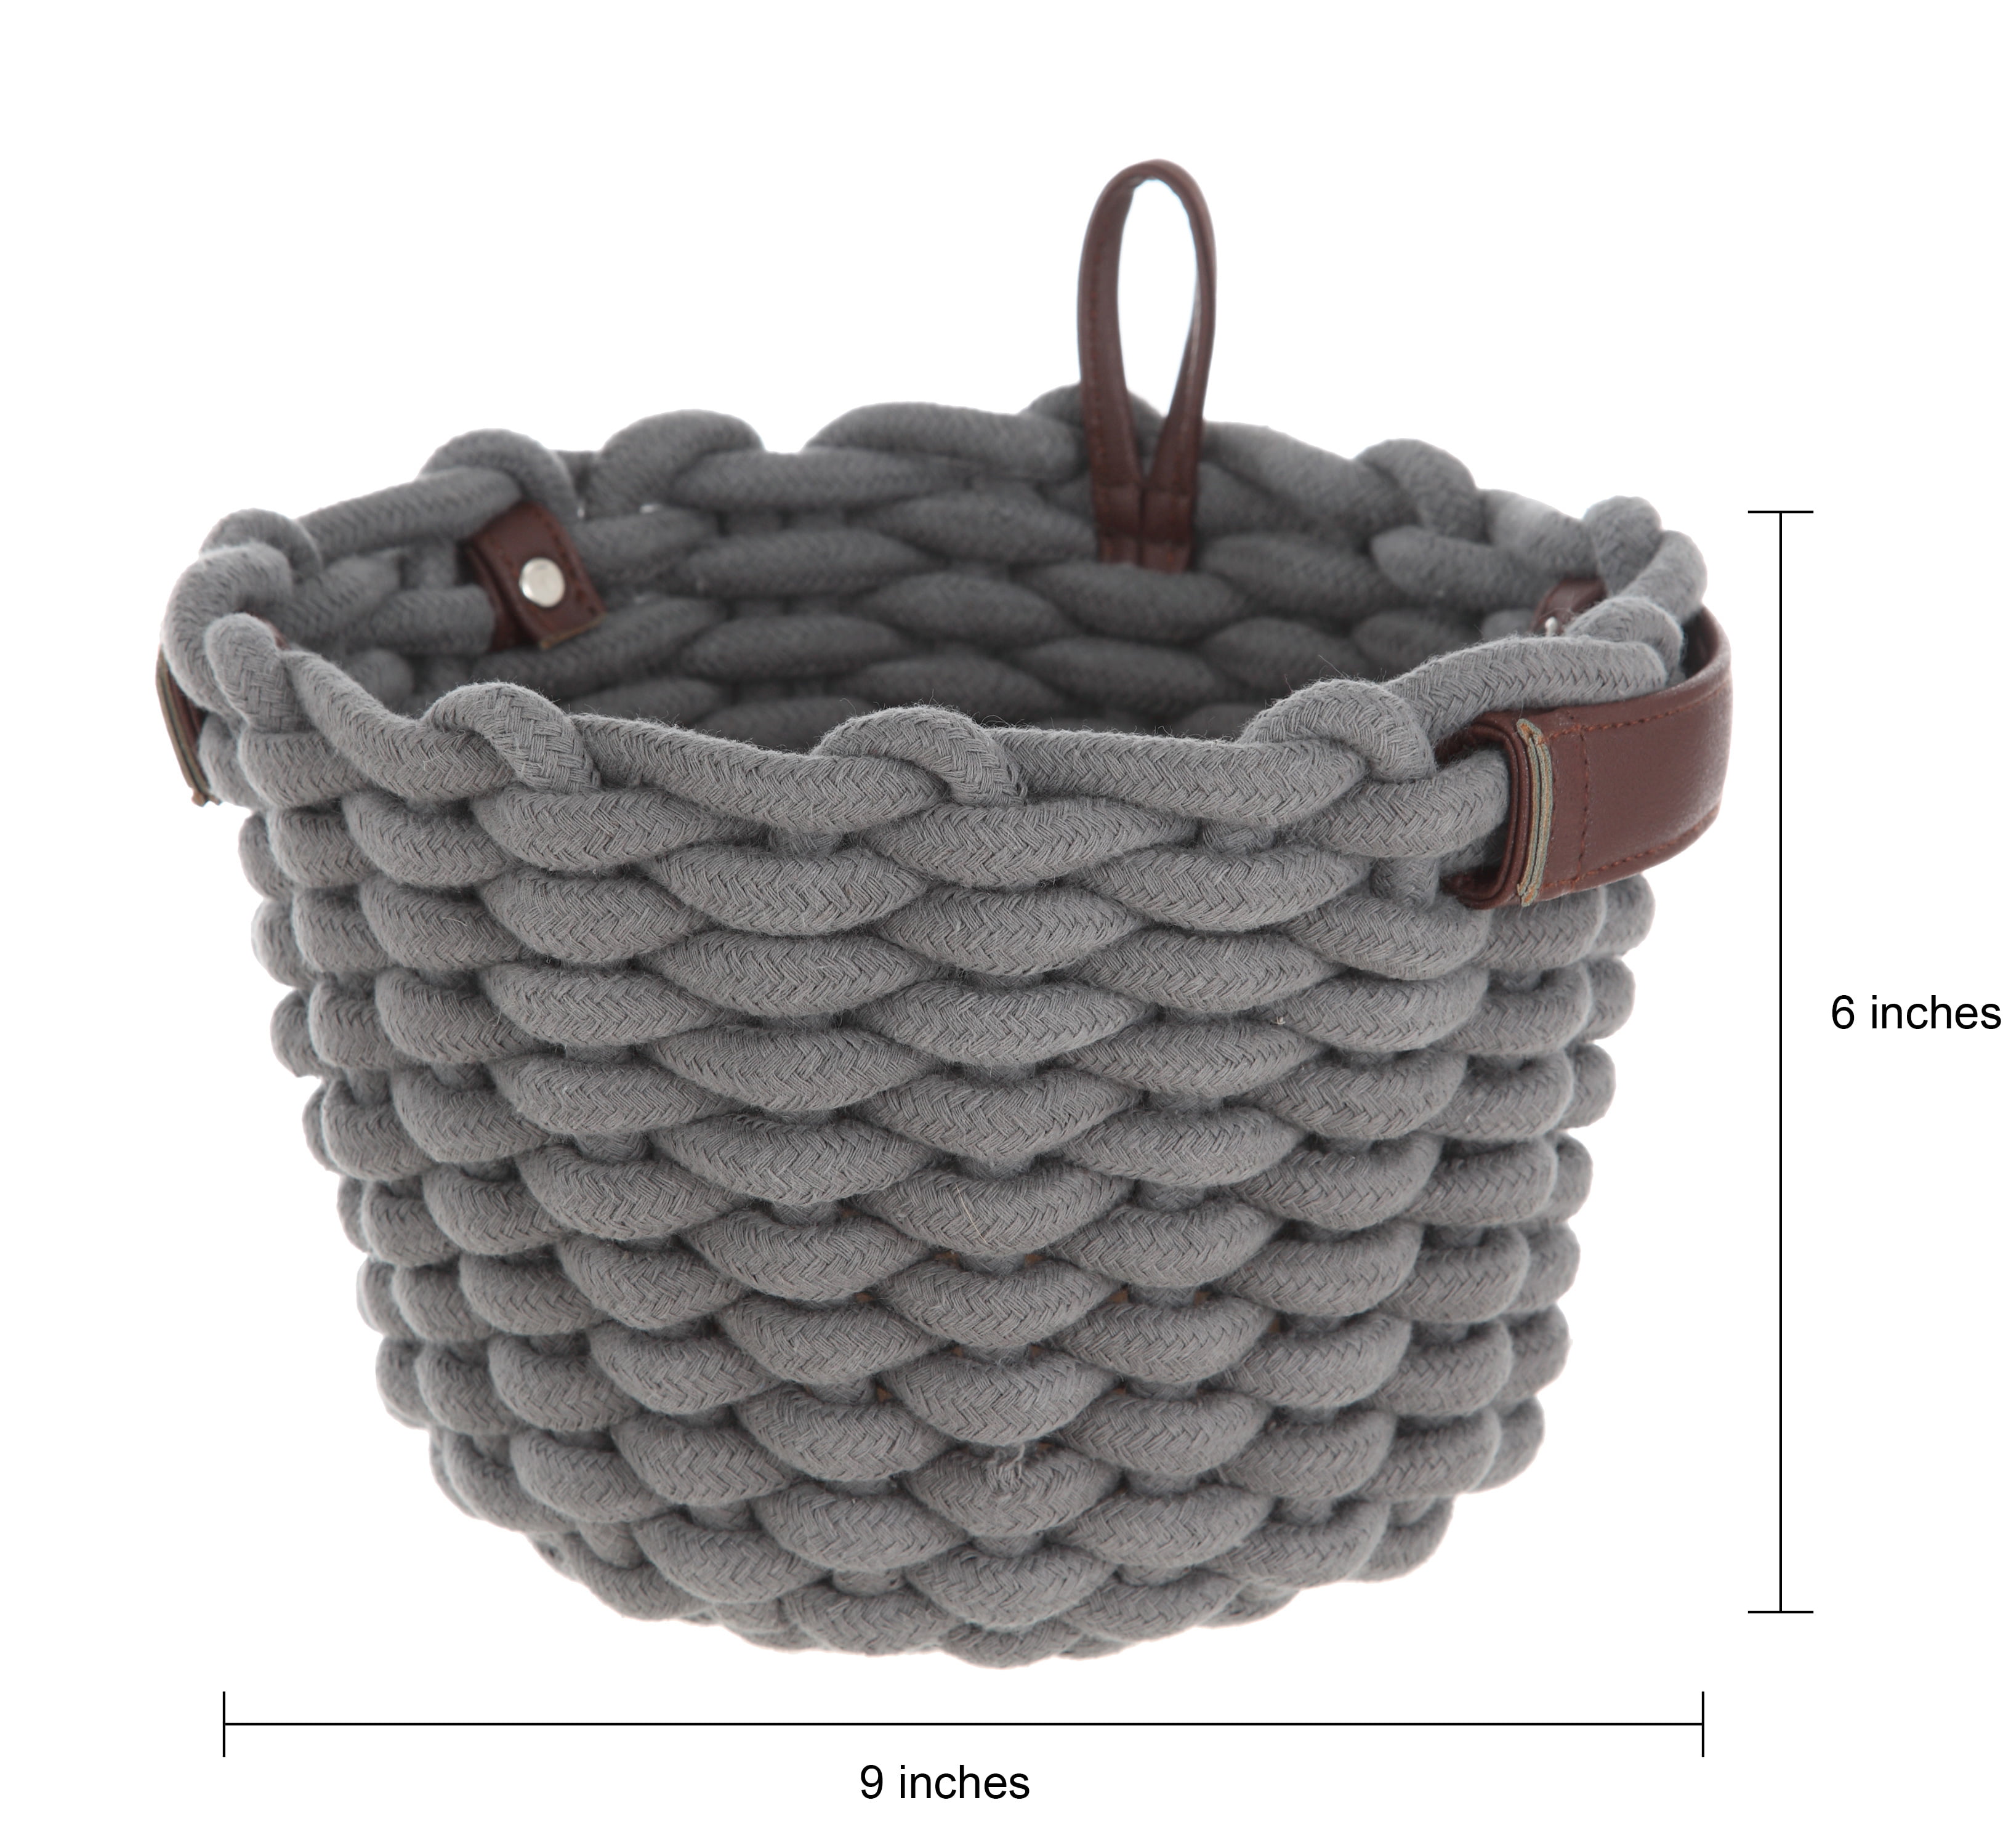  Finely-Woven Pack Baskets with Straps (Strap Color Varies) 2-pc  Set : Home & Kitchen